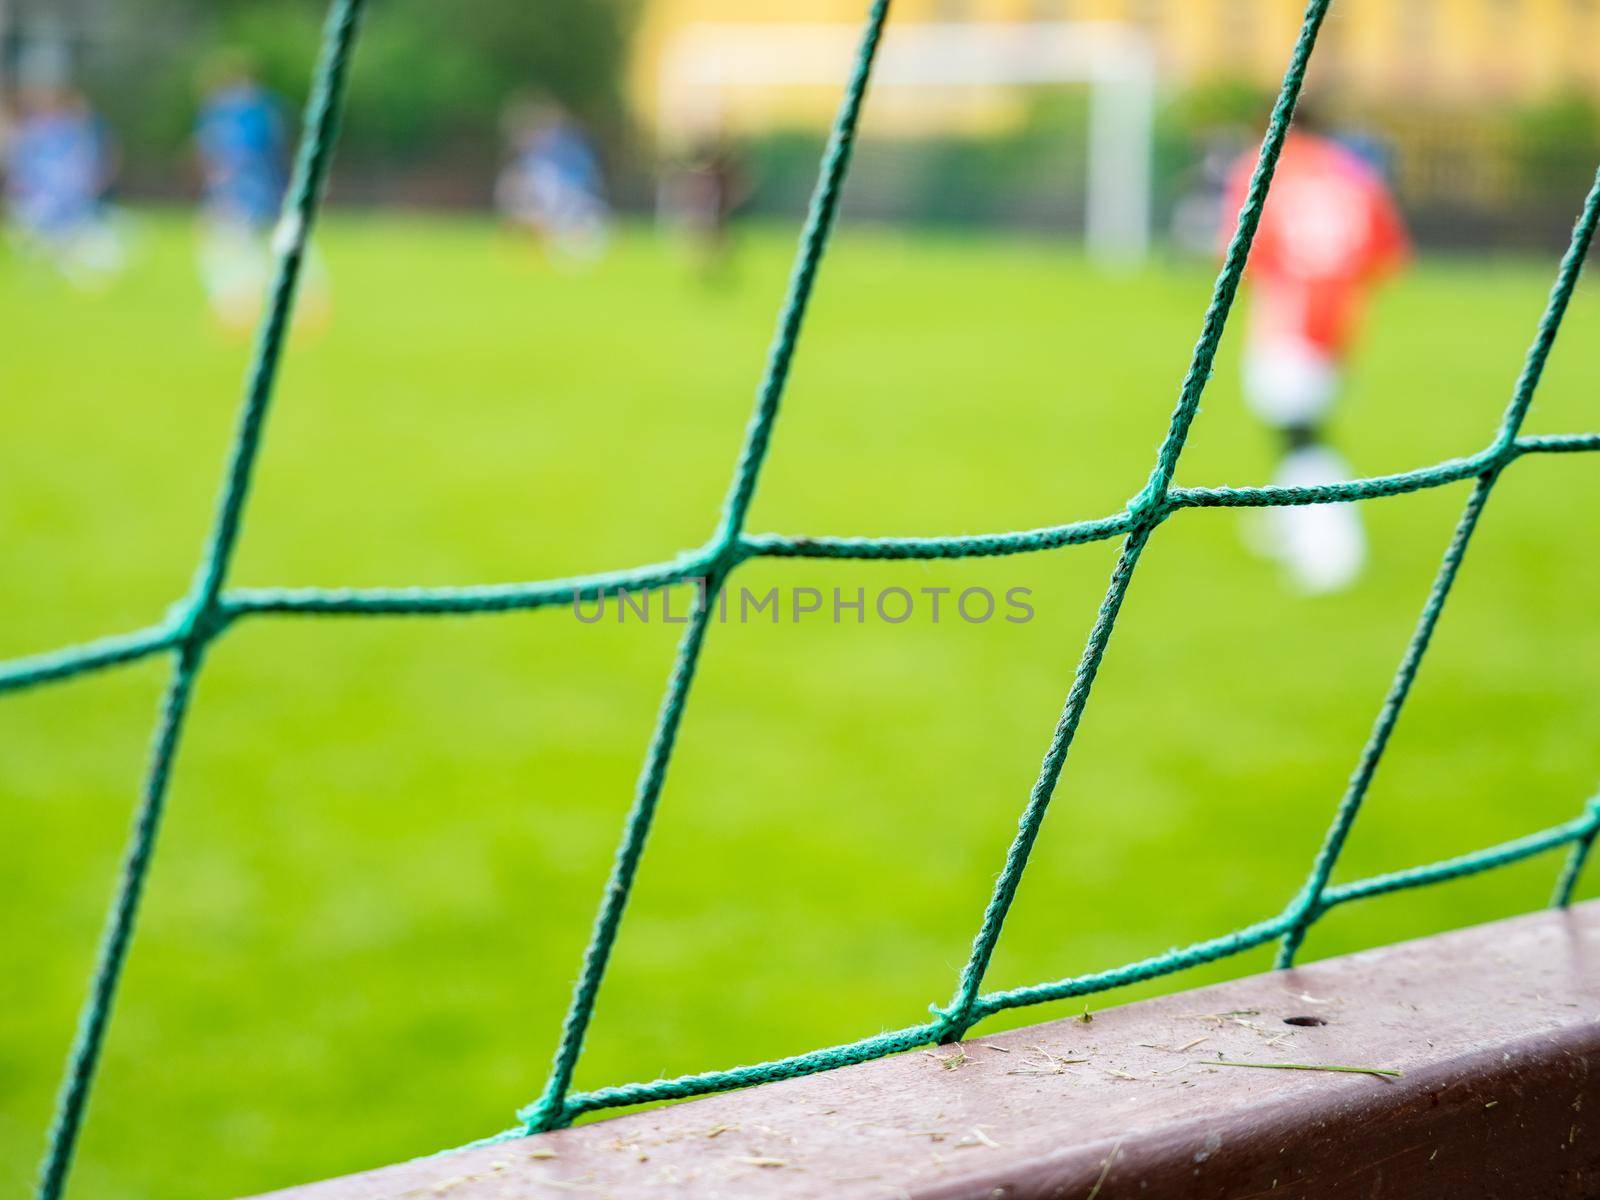 Soccer game behind the fence  by rdonar2